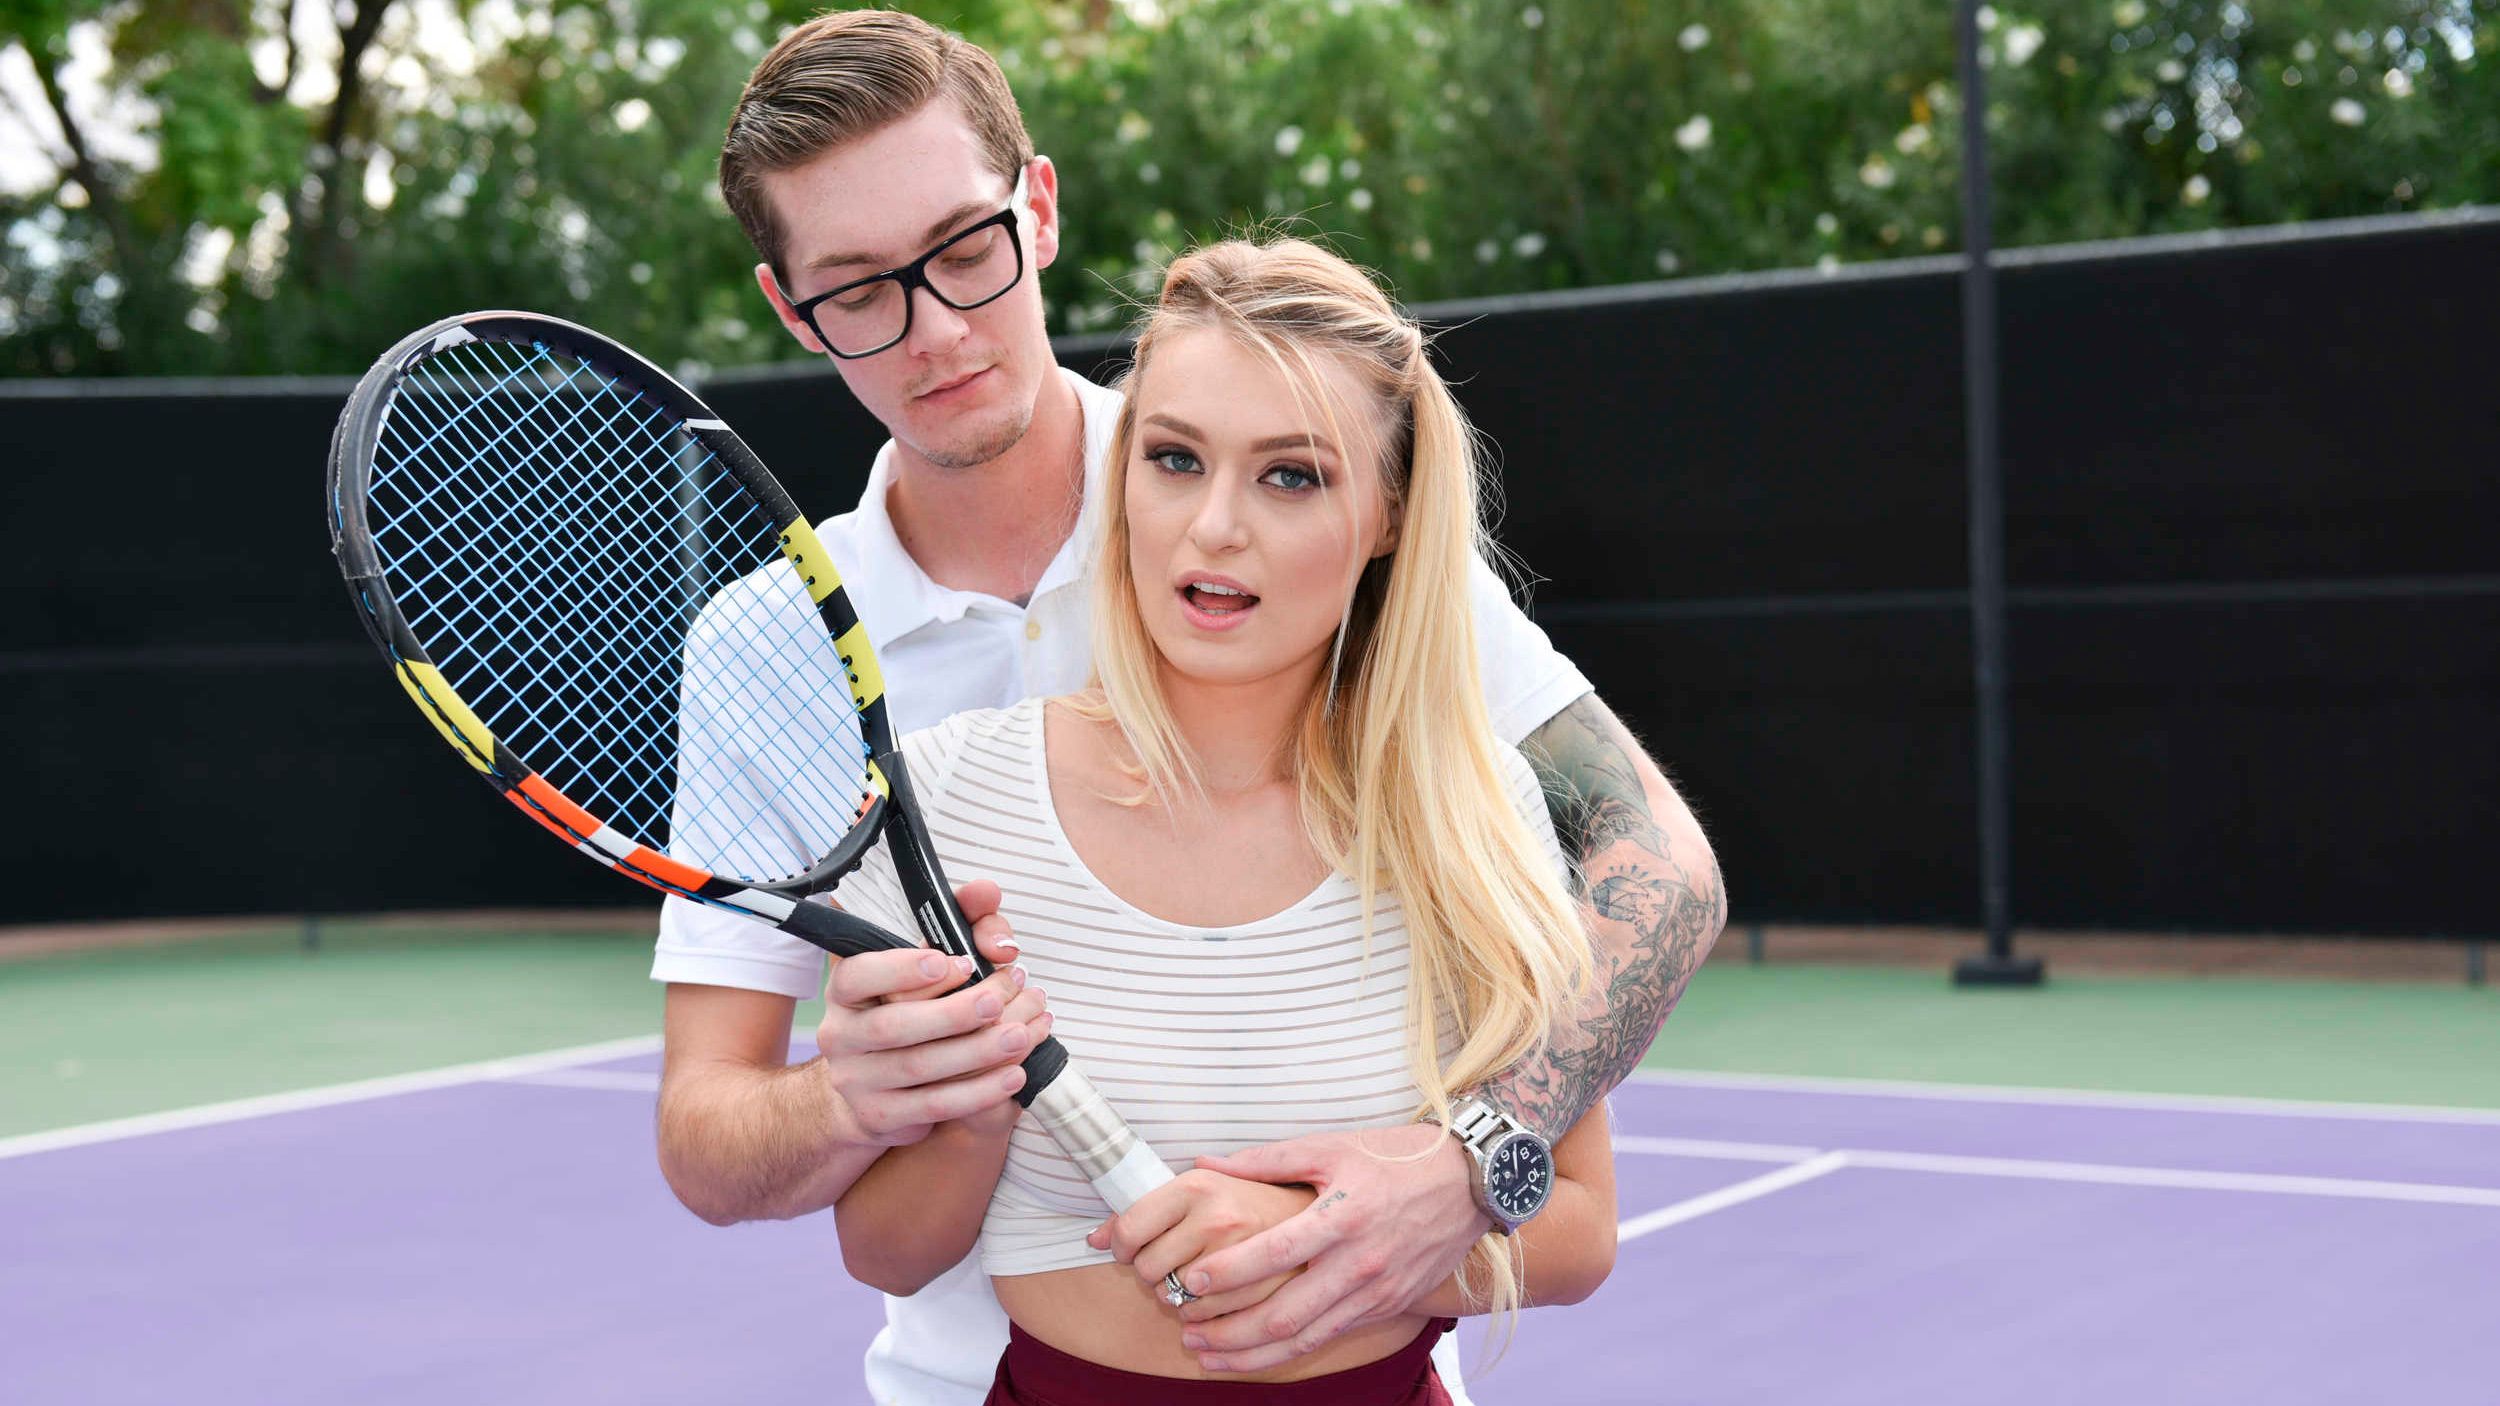 Outdoor sex on the tennis field with a good busty blonde Natalia Starr pic